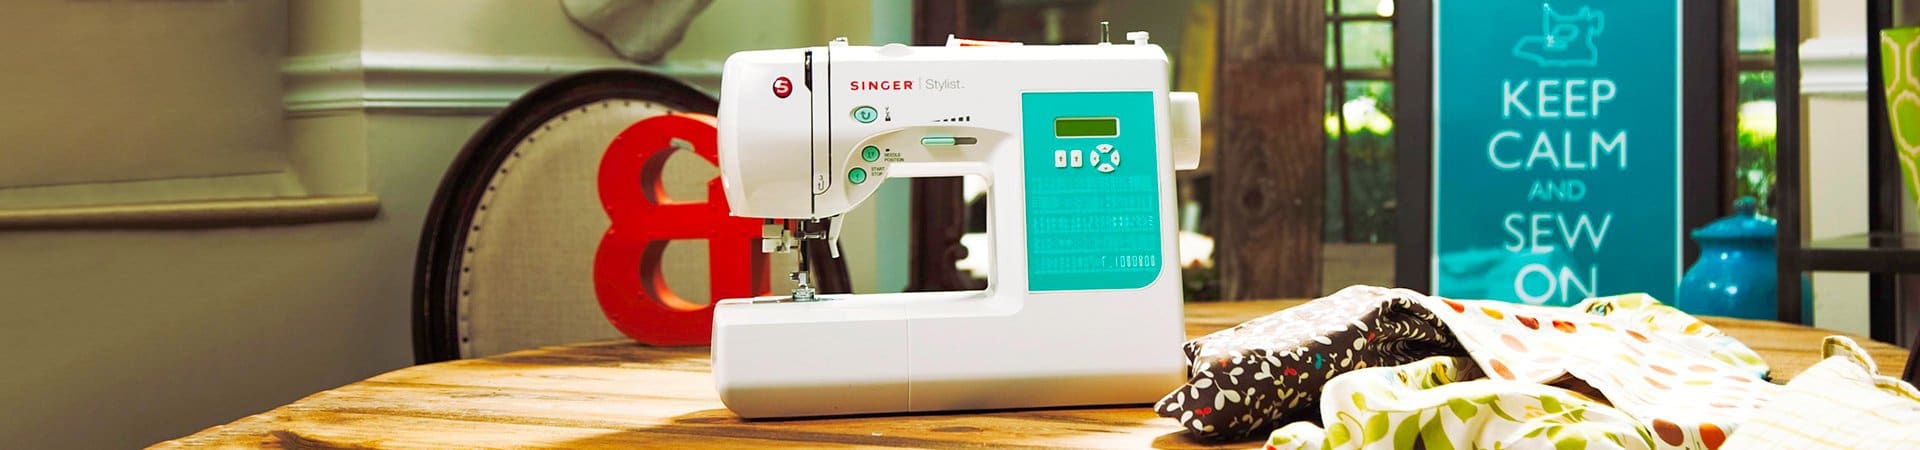 5 Best Sewing Machines For Jeans Reviewed In Detail Oct 2020,Cardamom Seeds For Planting